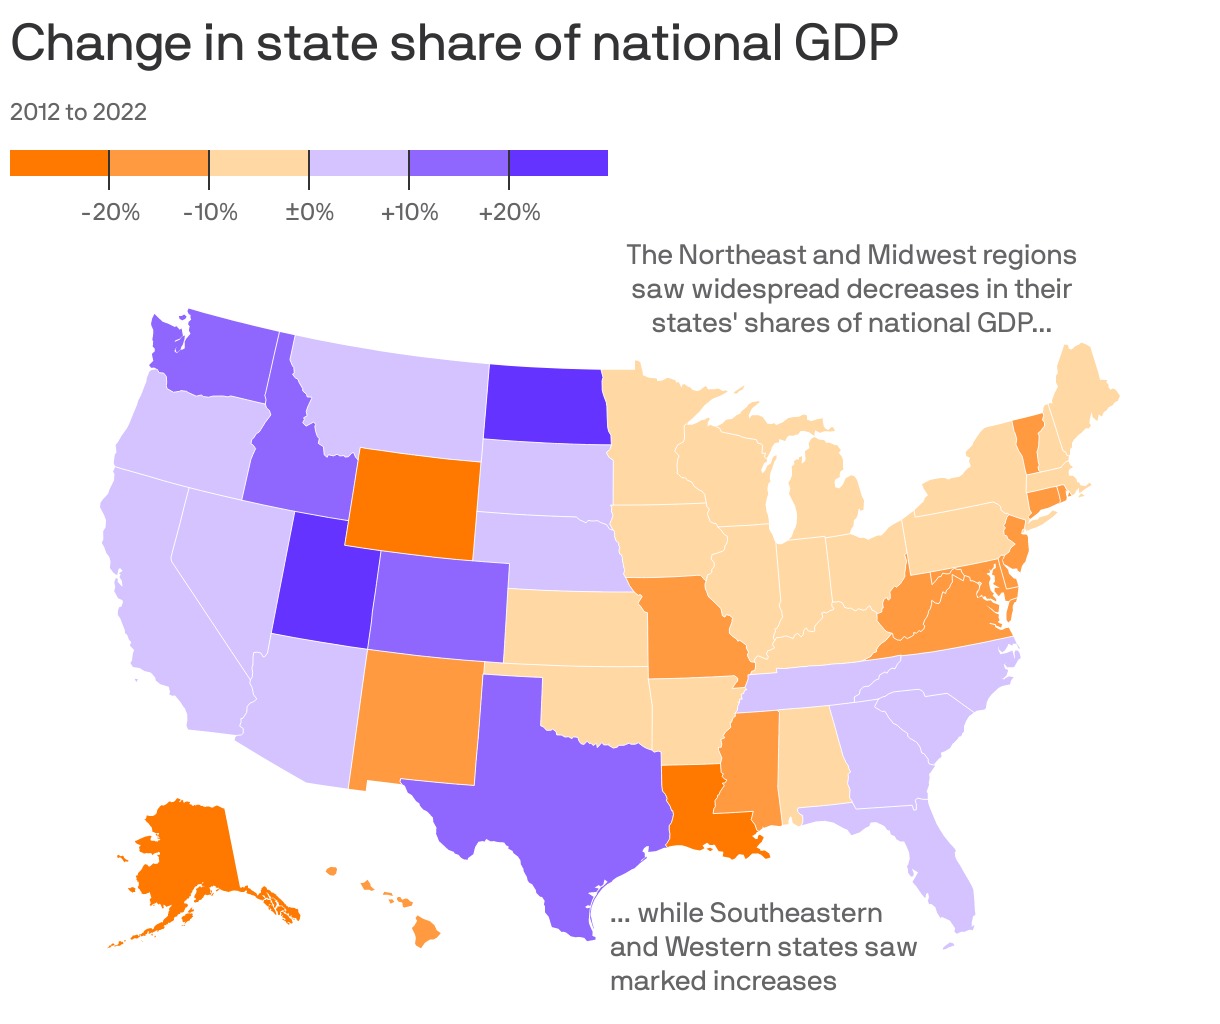 Change in state share of national GDP